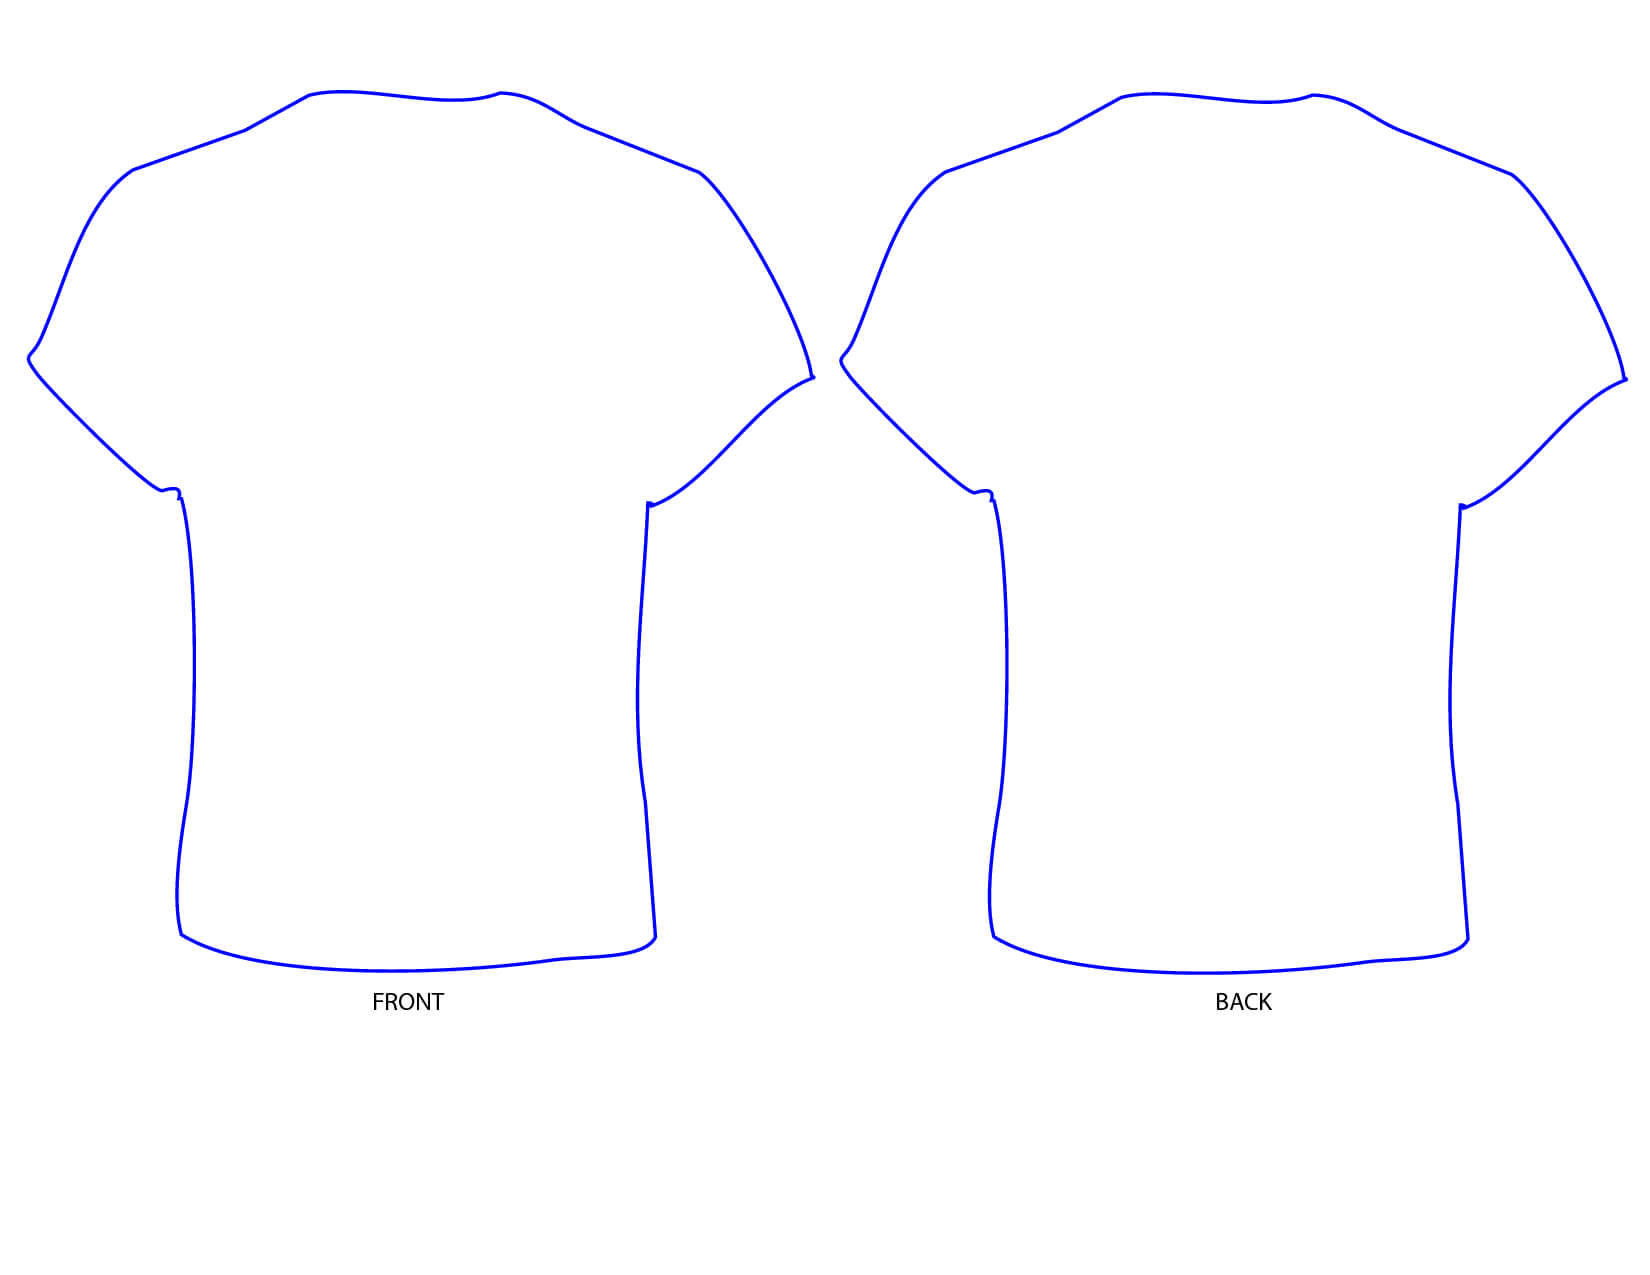 Free T Shirt Template Printable, Download Free Clip Art Regarding Blank Tshirt Template Printable